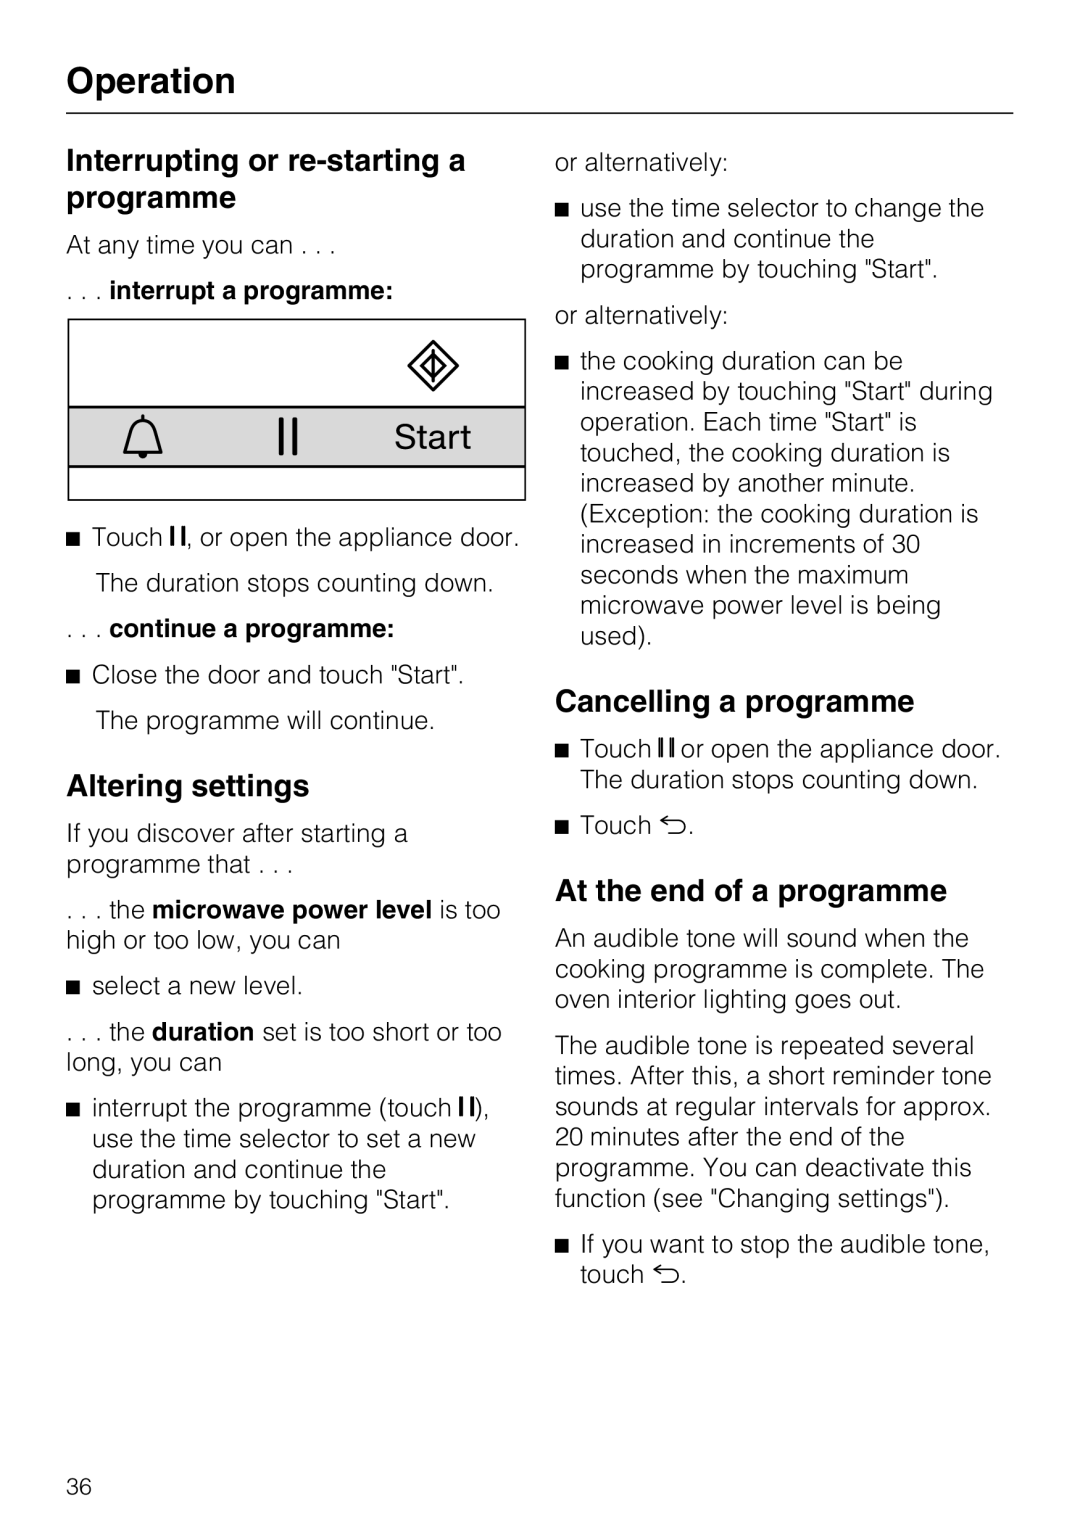 Miele 09 919 100 Interrupting or re-startinga programme, Altering settings, Cancelling a programme, Operation 